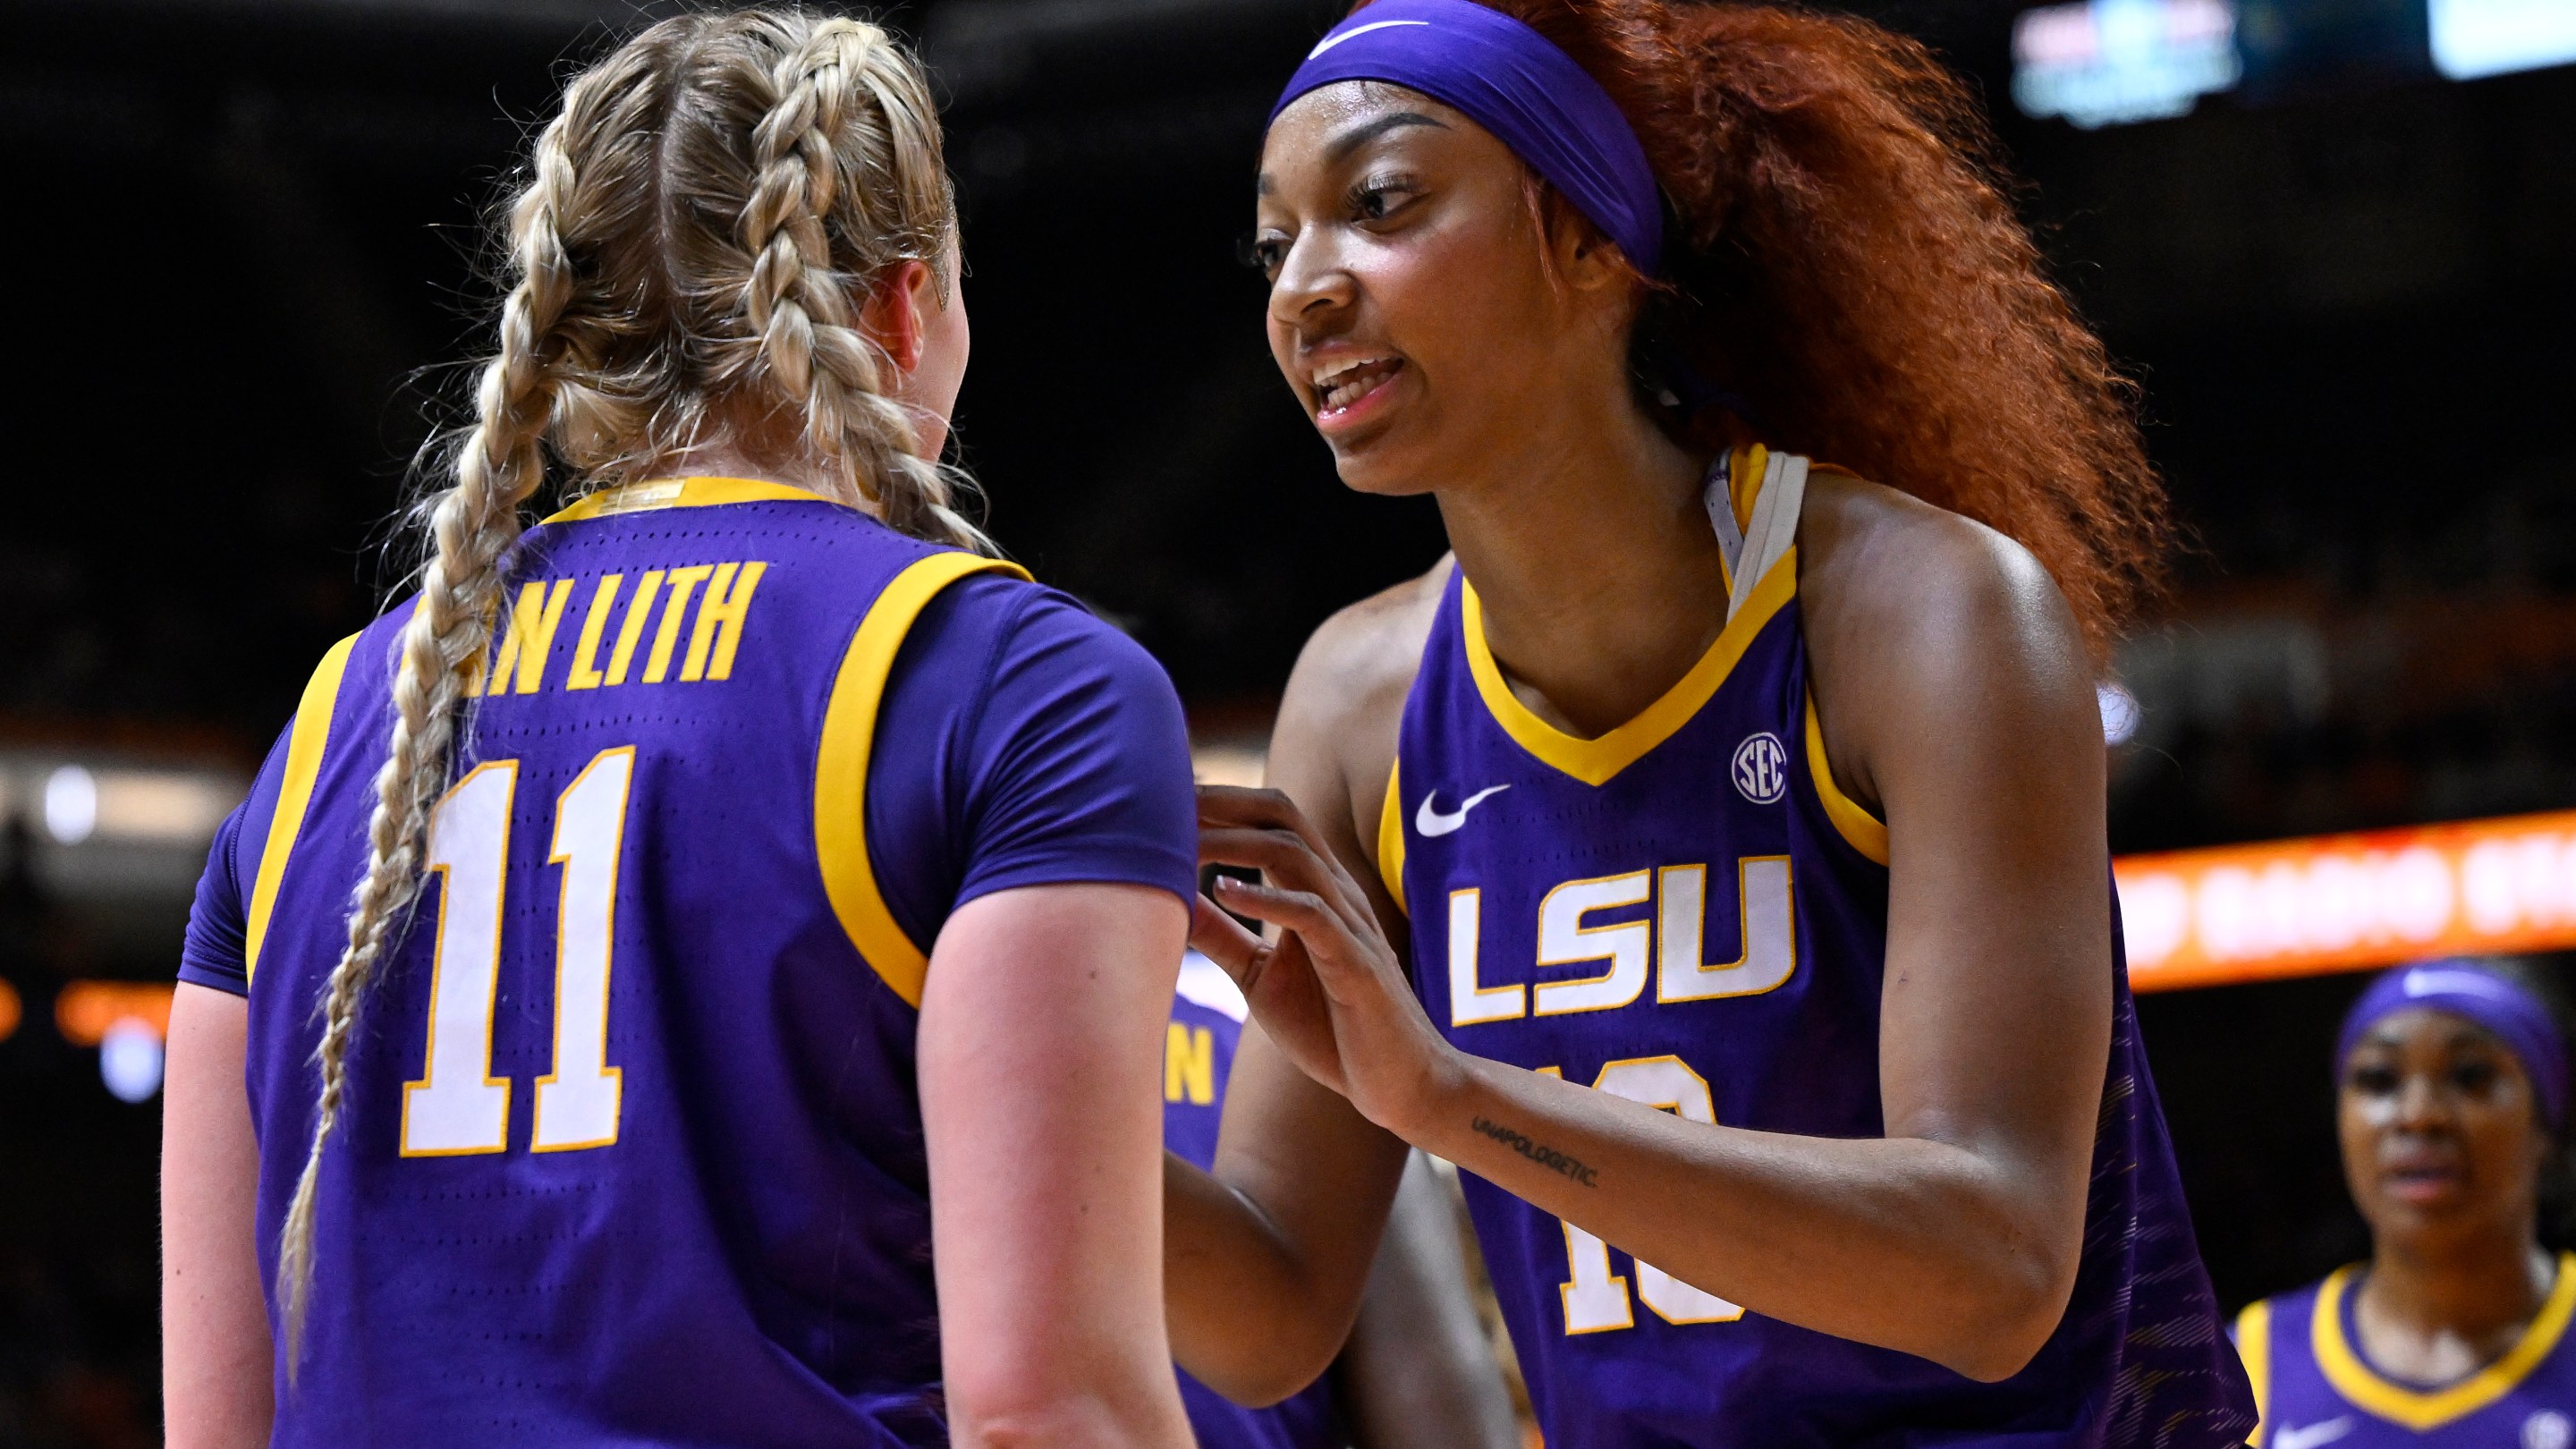 Hailey Van Lith #11 and Angel Reese #10 of the LSU Lady Tigers speak against the Tennessee Lady Vols in the second quarter at Thompson-Boling Arena on February 25, 2024 in Knoxville, Tennessee.